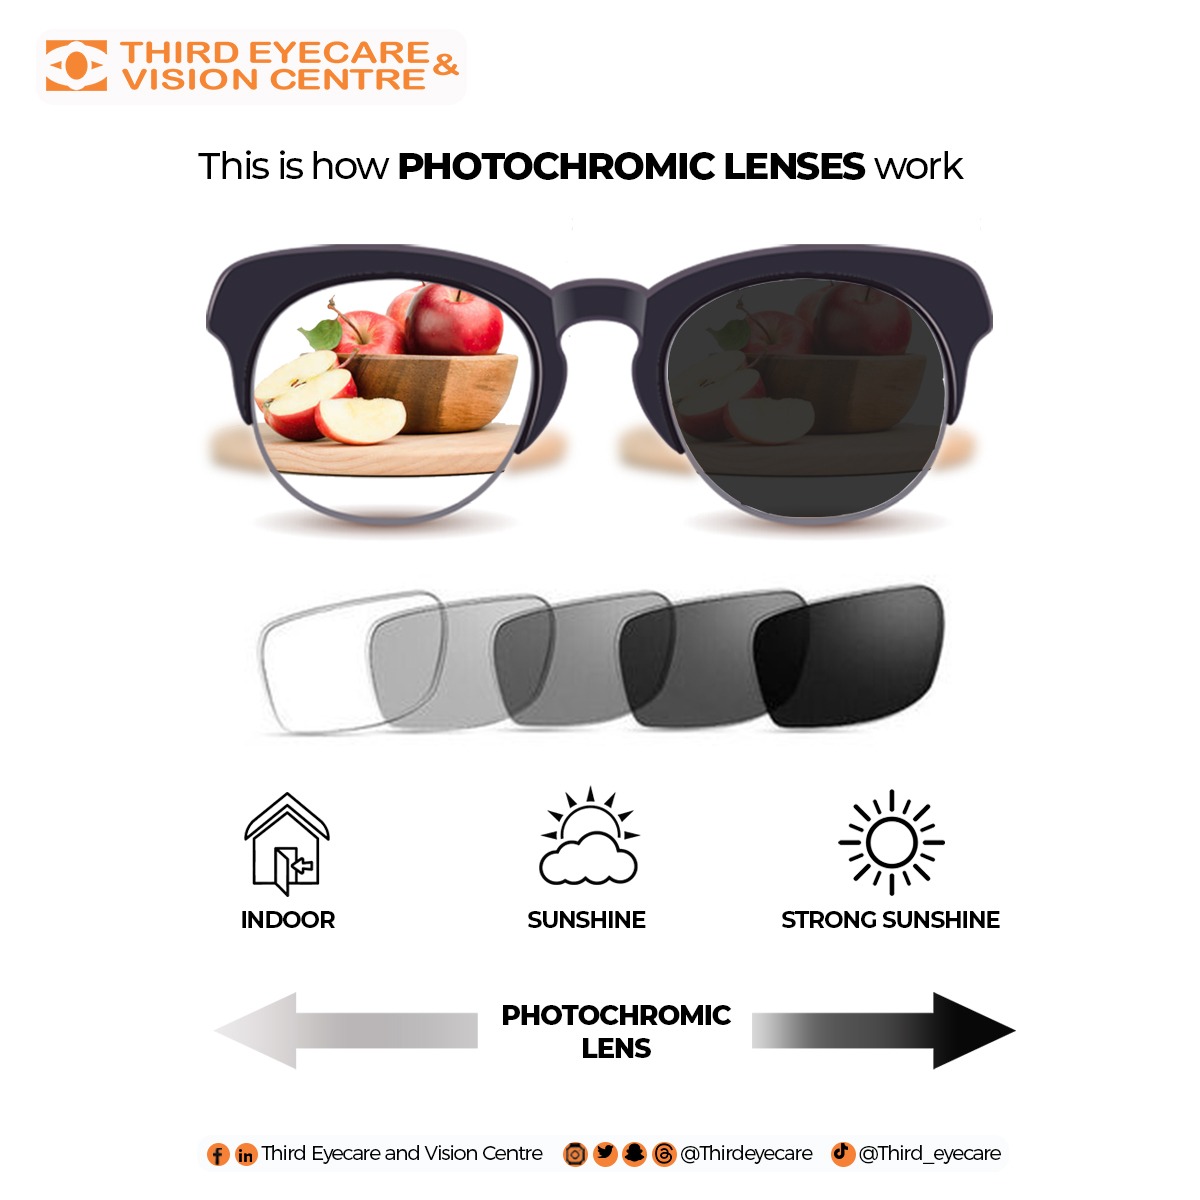 Photochromic lenses: Light-responsive technology that darkens in sunlight and clears indoors. Get photochromic lenses to protect your eyes from the sun's rays. #thirdeyecare #besteyeclinicinghana #photochromiclens #Eyeglasses #March2024